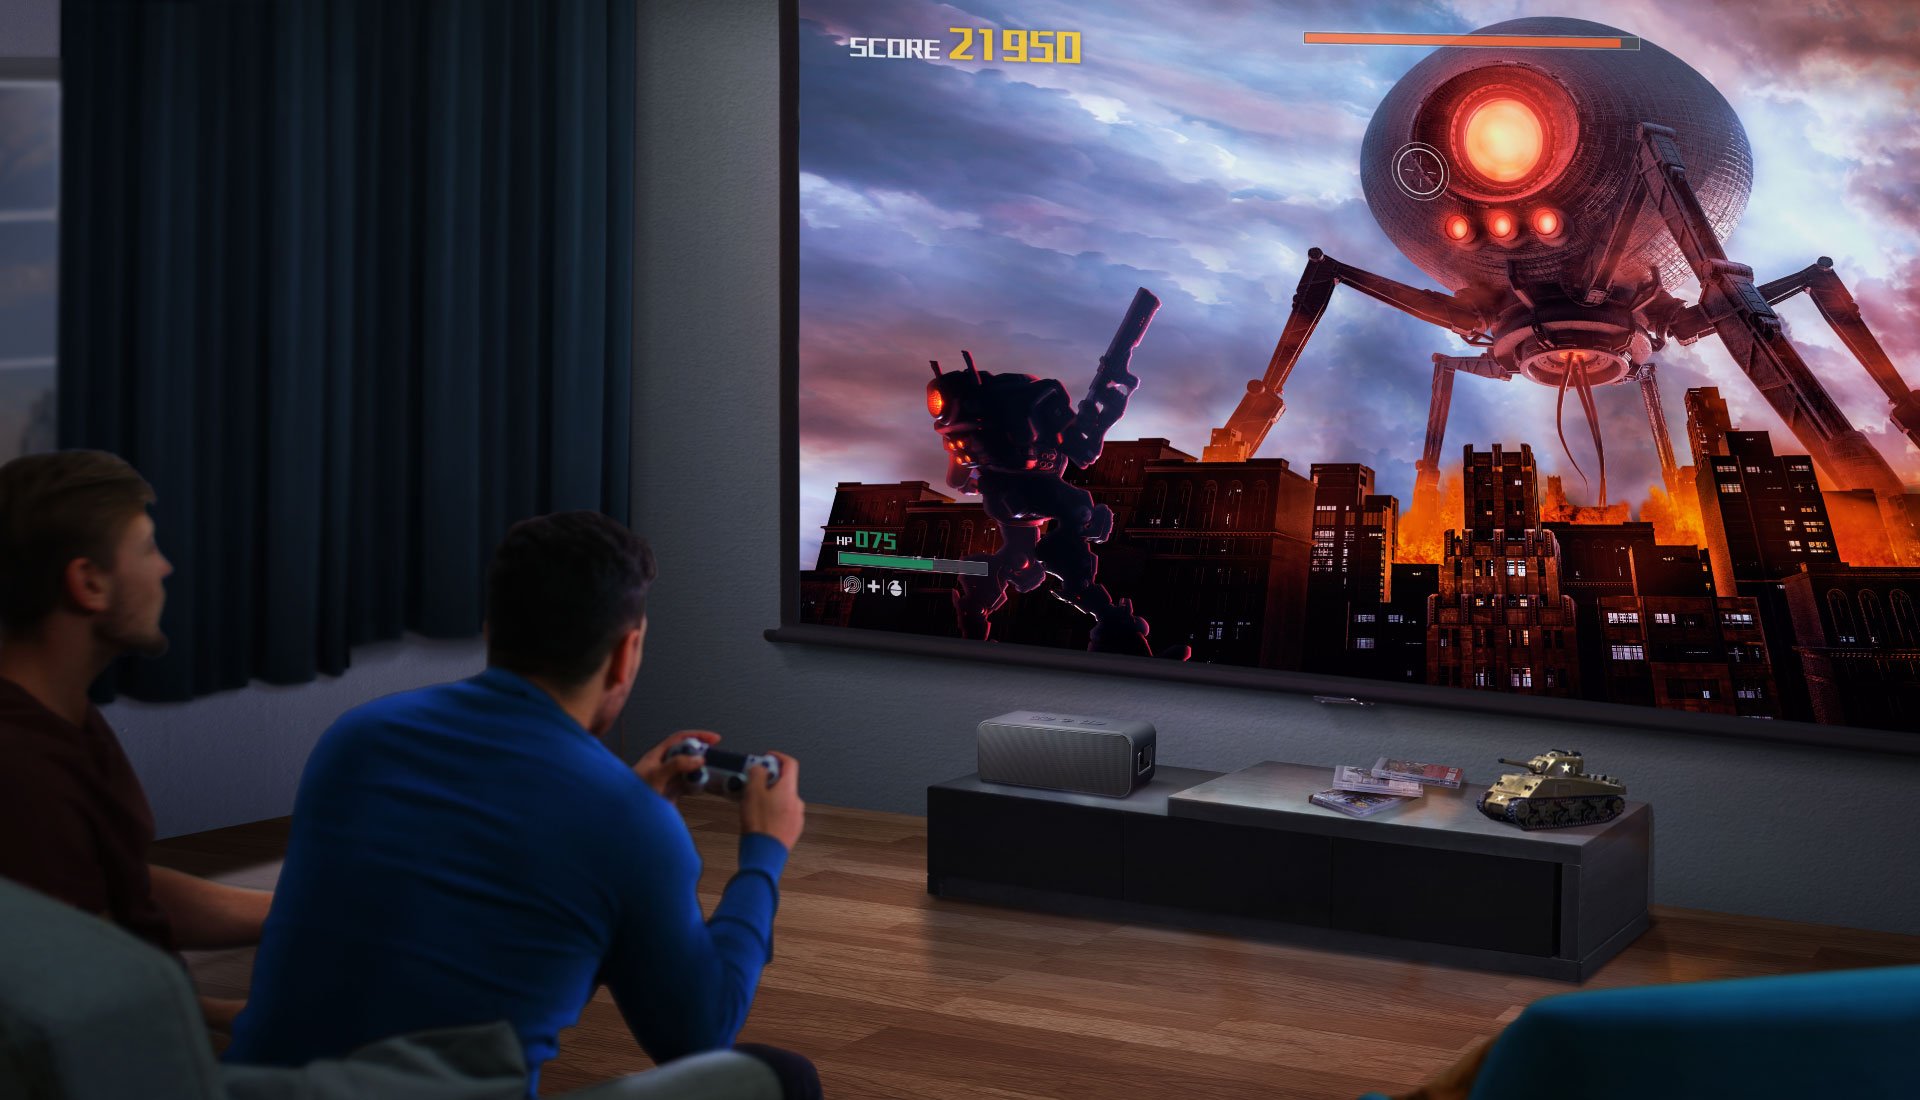 Built for gamers, BenQ's Console Gaming Home Projector Powered by Android TV th685i is supercharged with 8.3ms low-input lag for real-time video game thrills.